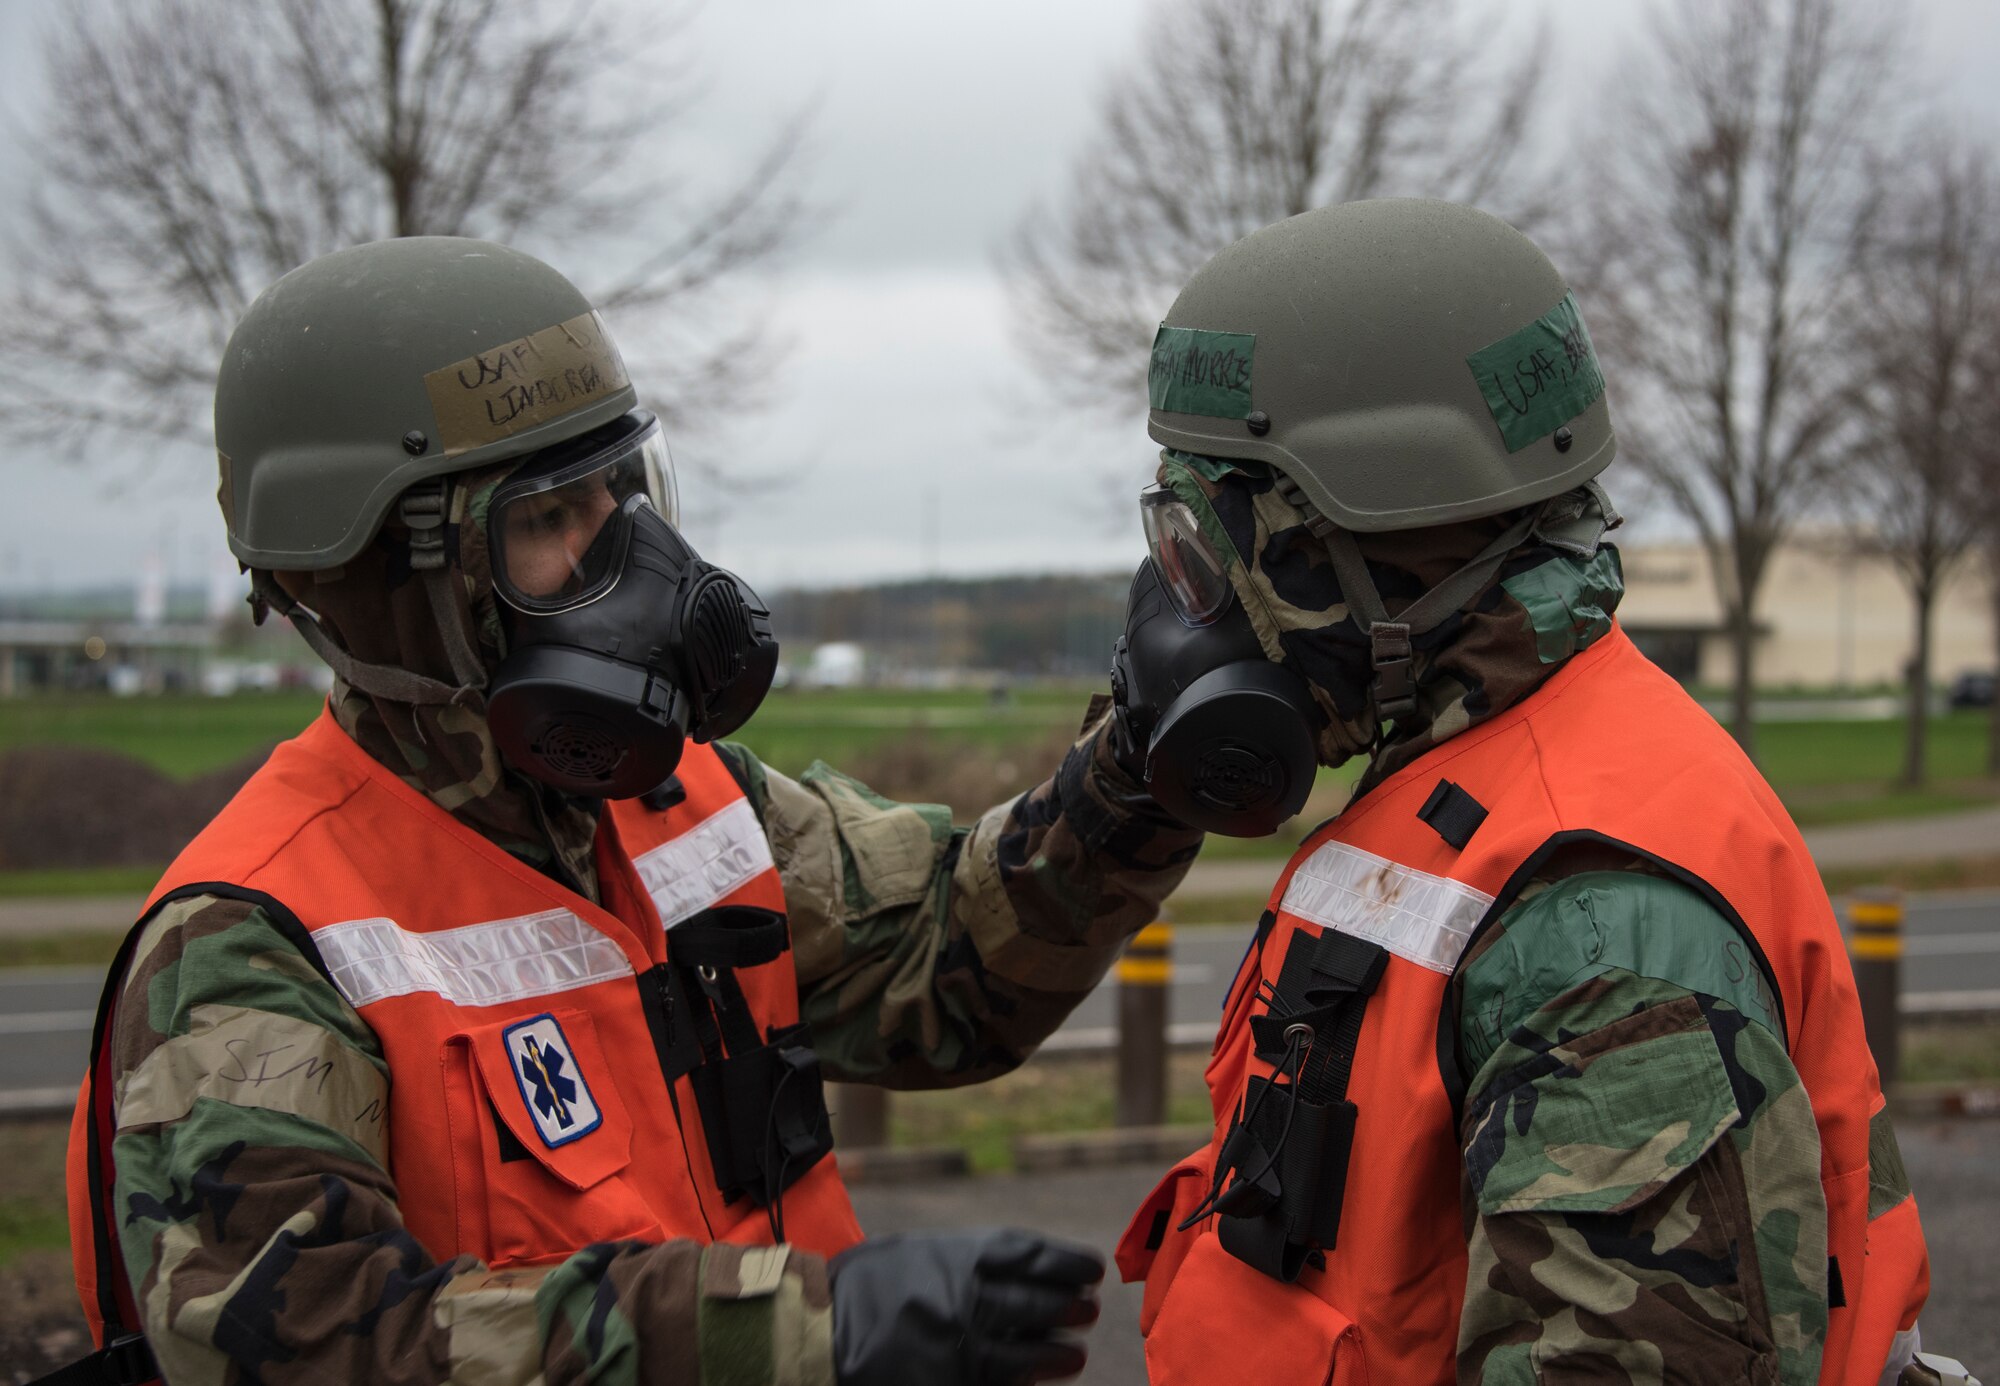 U.S. Air Force Staff Sgt. Joseph Lindgren, left, and Senior Airman Trevern Morris, right, 52nd Medical Group dental technicians, perform "buddy checks" during an exercise at Spangdahlem Air Base, Germany, Nov. 17, 2020. "Buddy checks" help ensure personnel are protected from any potentially harmful airborne substances.  (U.S. Air Force photo by Senior Airman Chanceler Nardone)